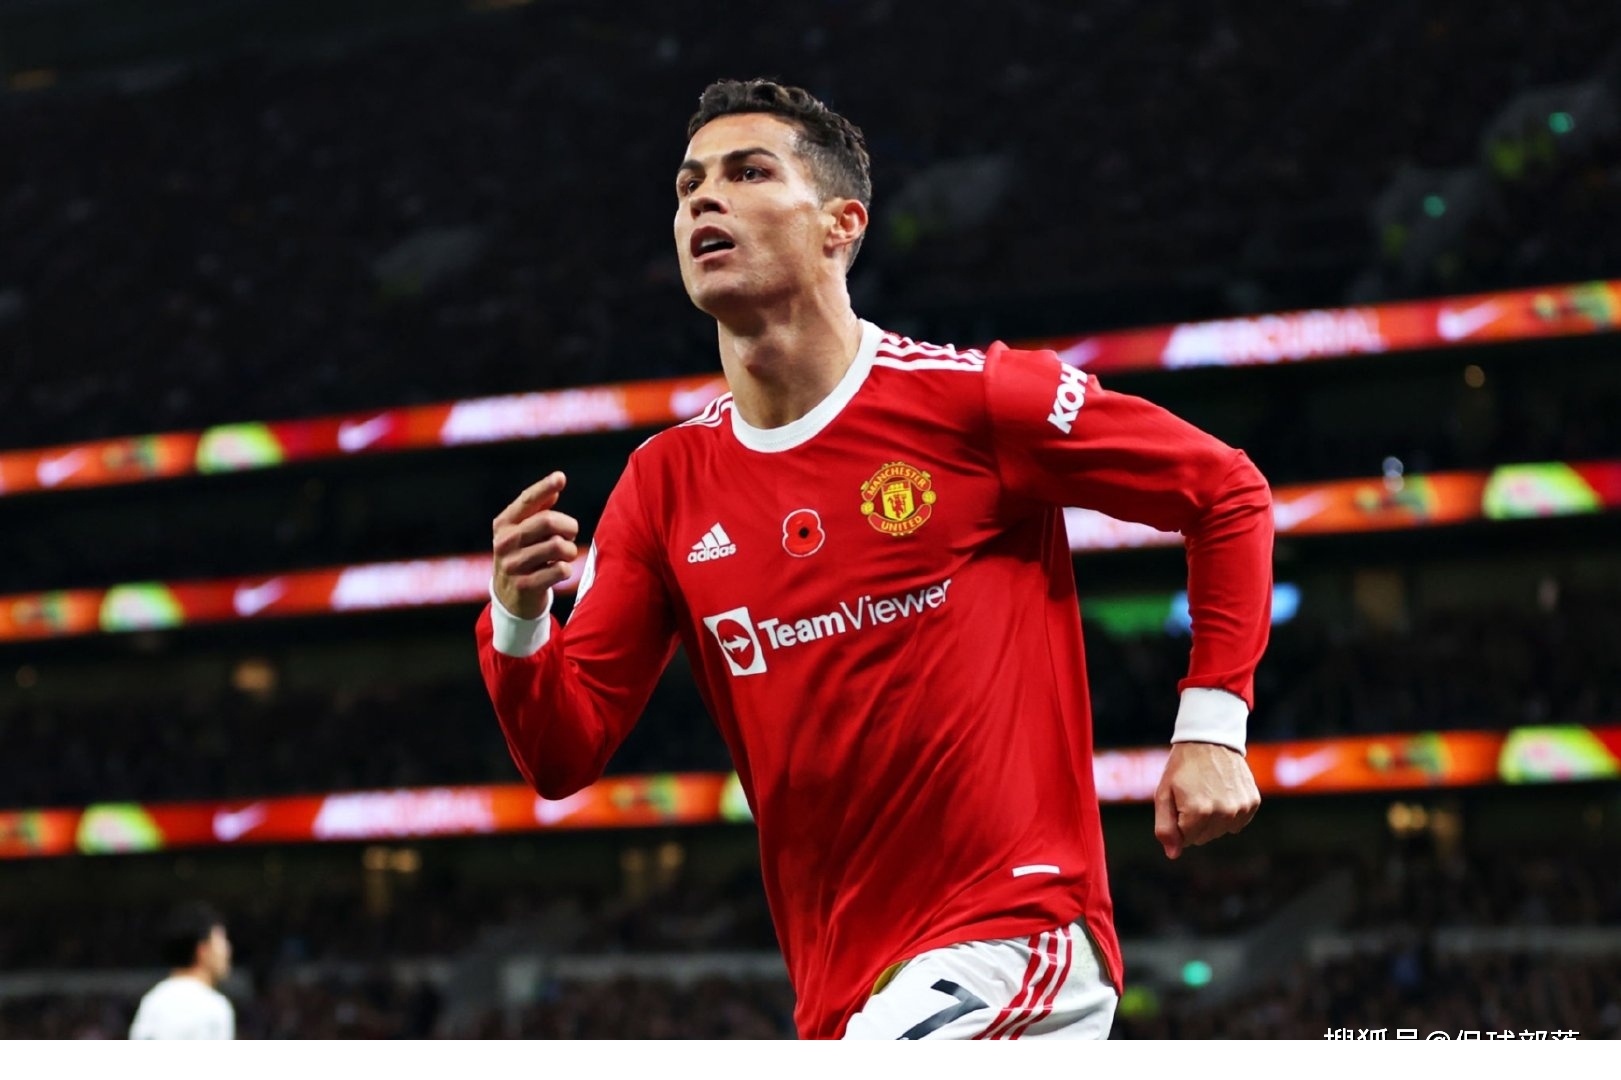 Cristiano Ronaldo Manchester United 2021 Wallpapers - Top Free ...